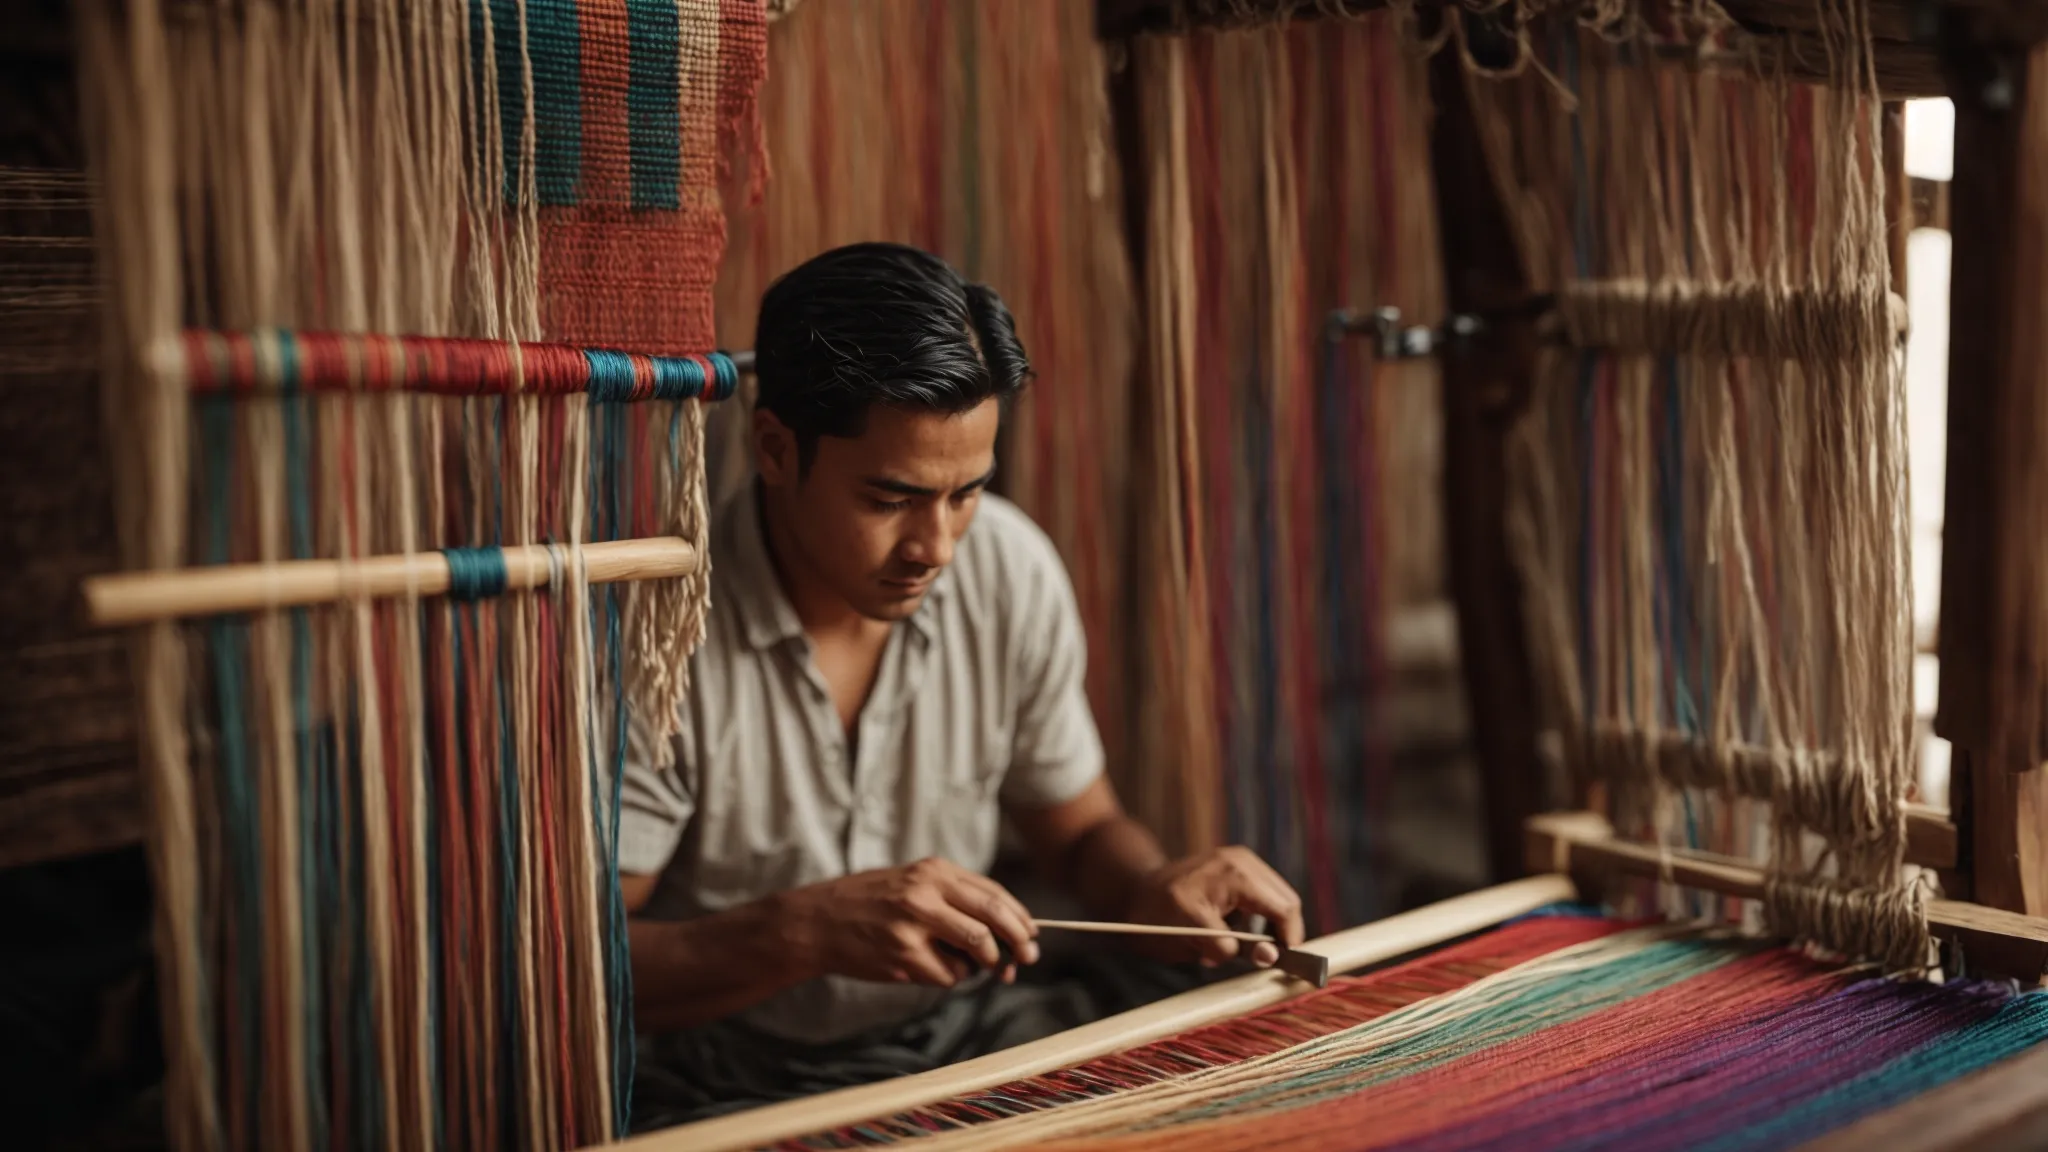 a craftsman intently weaving a colorful tapestry on a traditional wooden loom.